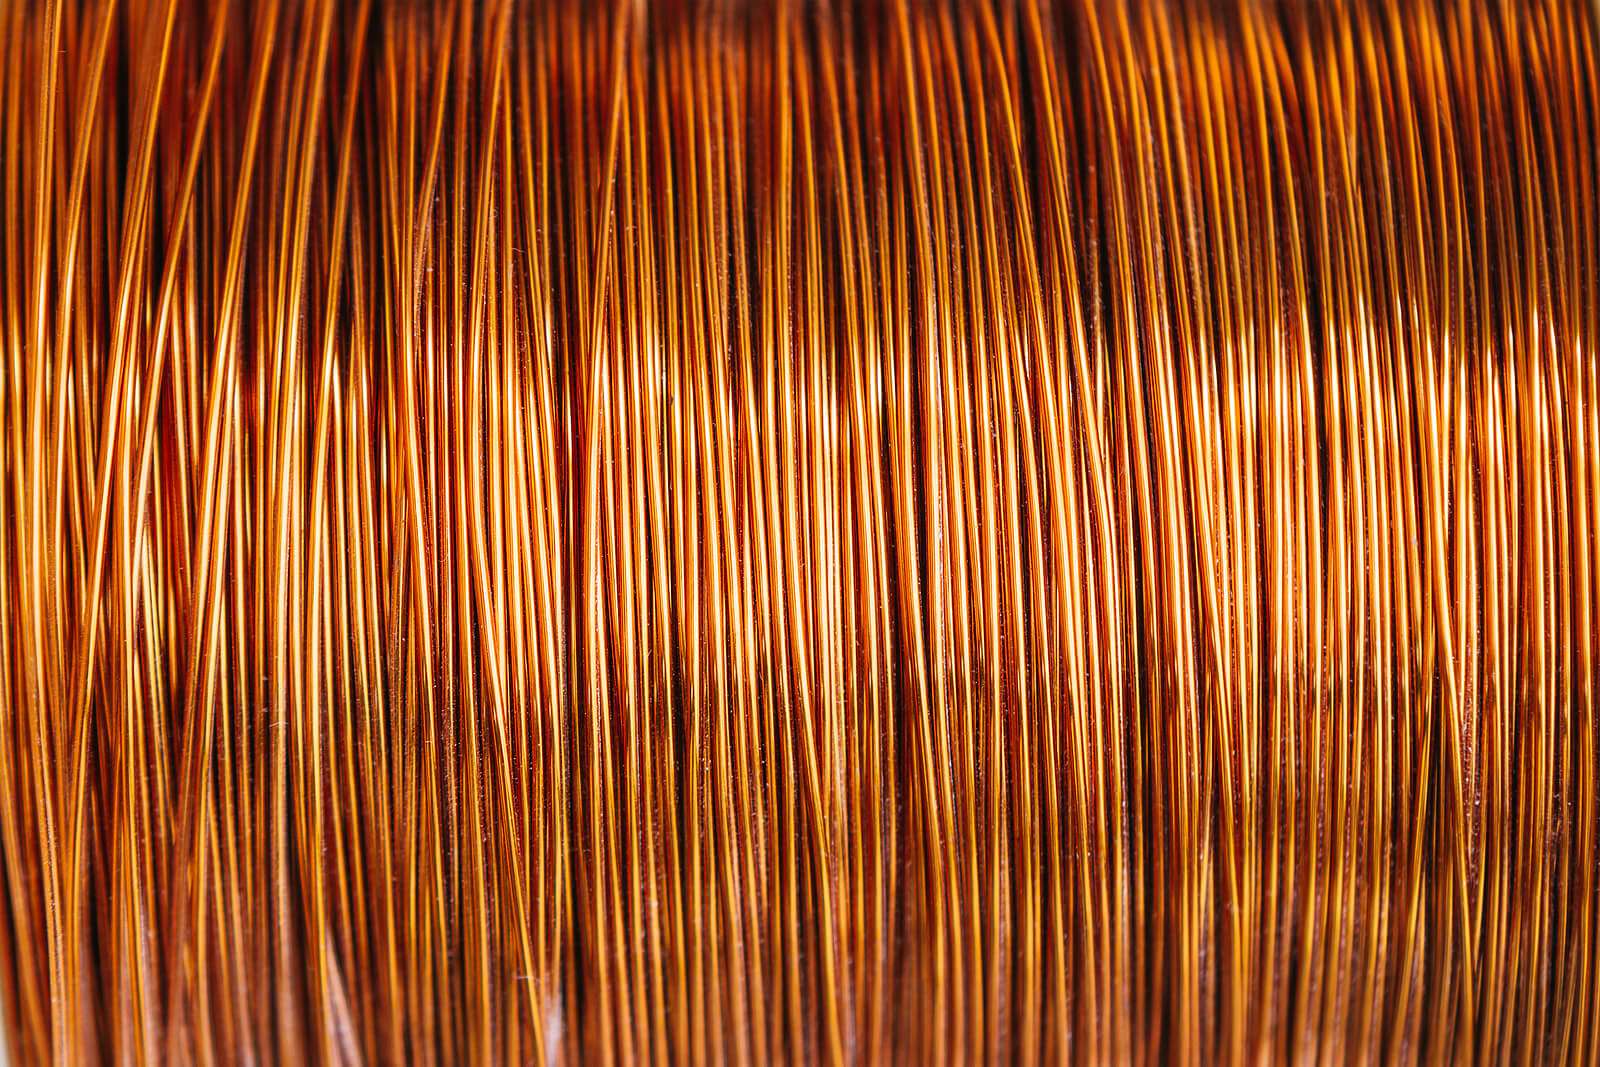 https://cmcserviceexperts.com/wp-content/uploads/2021/10/Facts-about-Copper-Wire-1.jpg